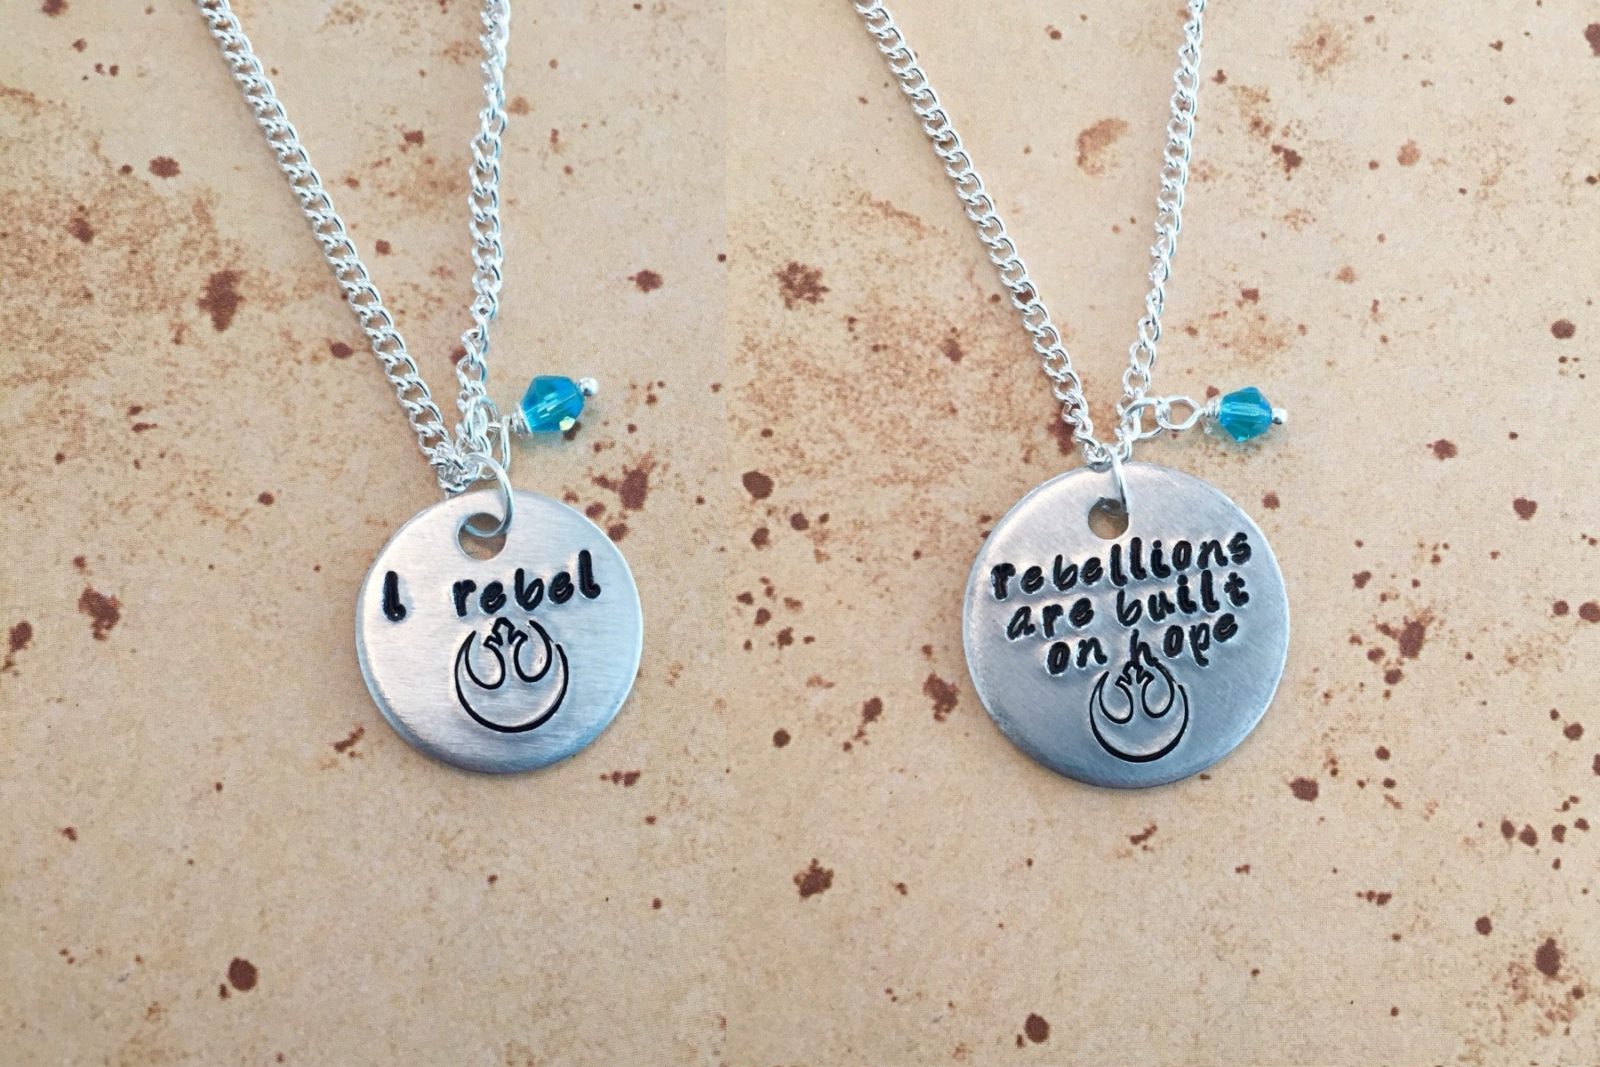 Star Wars Rogue One Jyn Erso inspired quote stamped charm necklaces by Etsy seller Kawaii Candy Couture UK